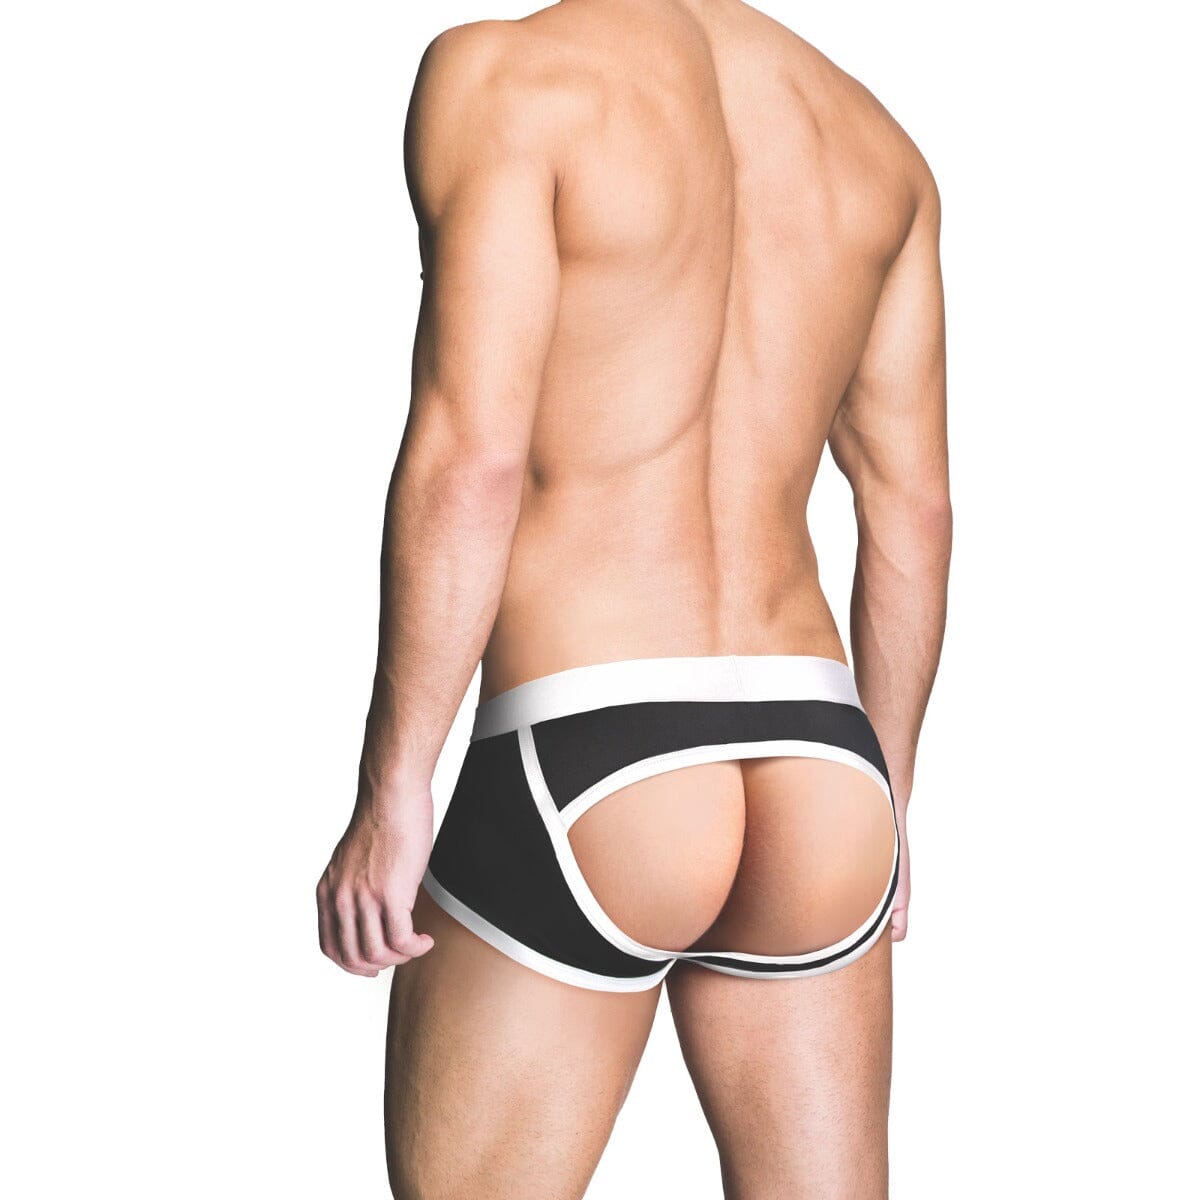 Prowler RED Ass-less Trunk White Menswear Prowler RED (ABS PRO) 